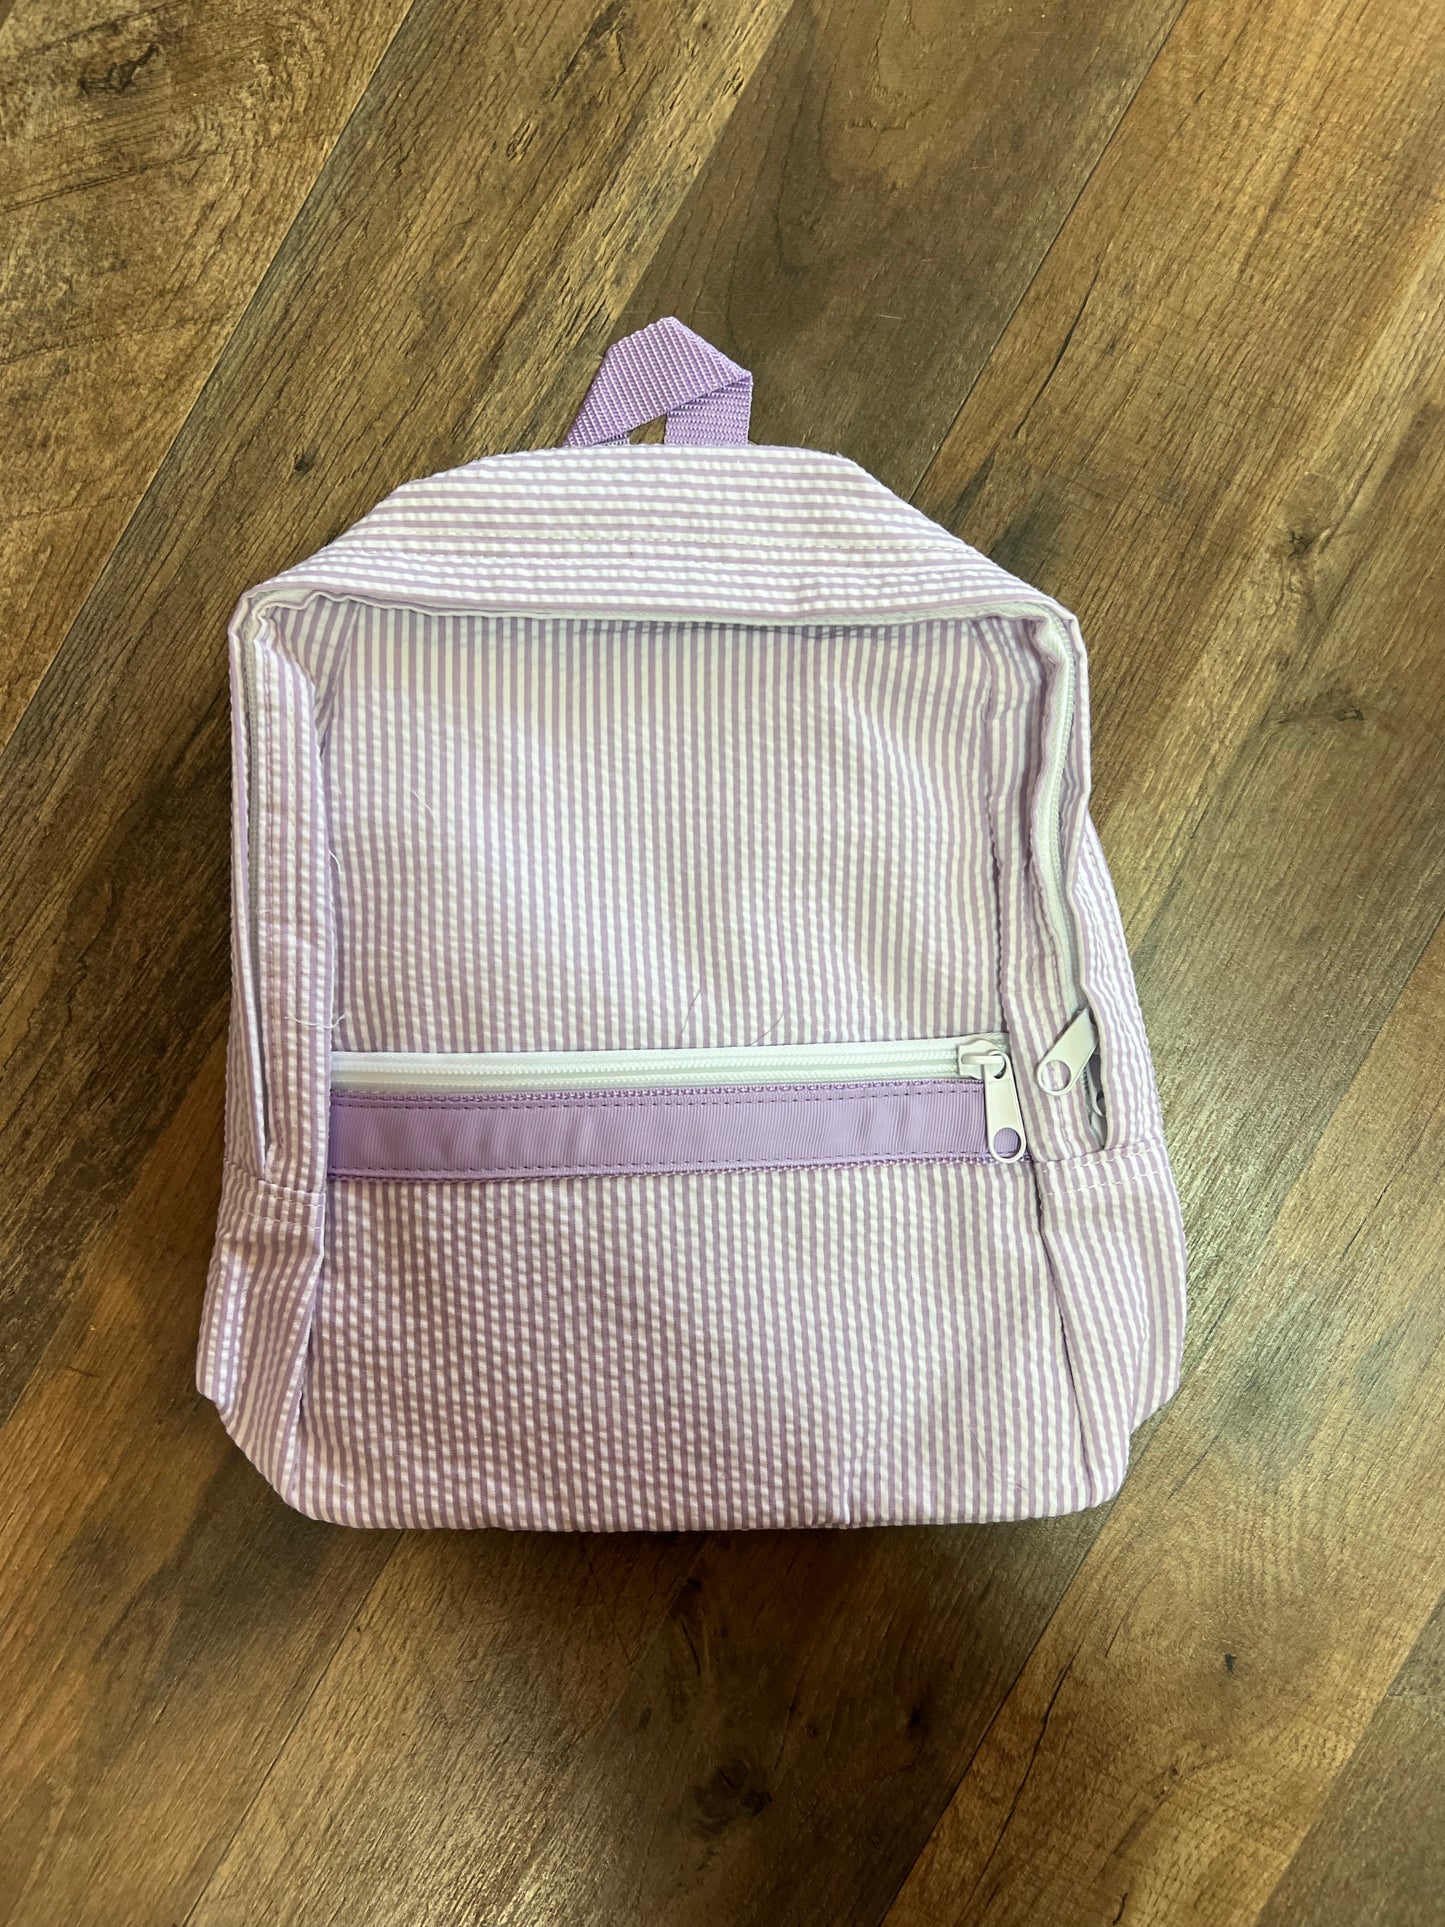 Small purple mint backpack